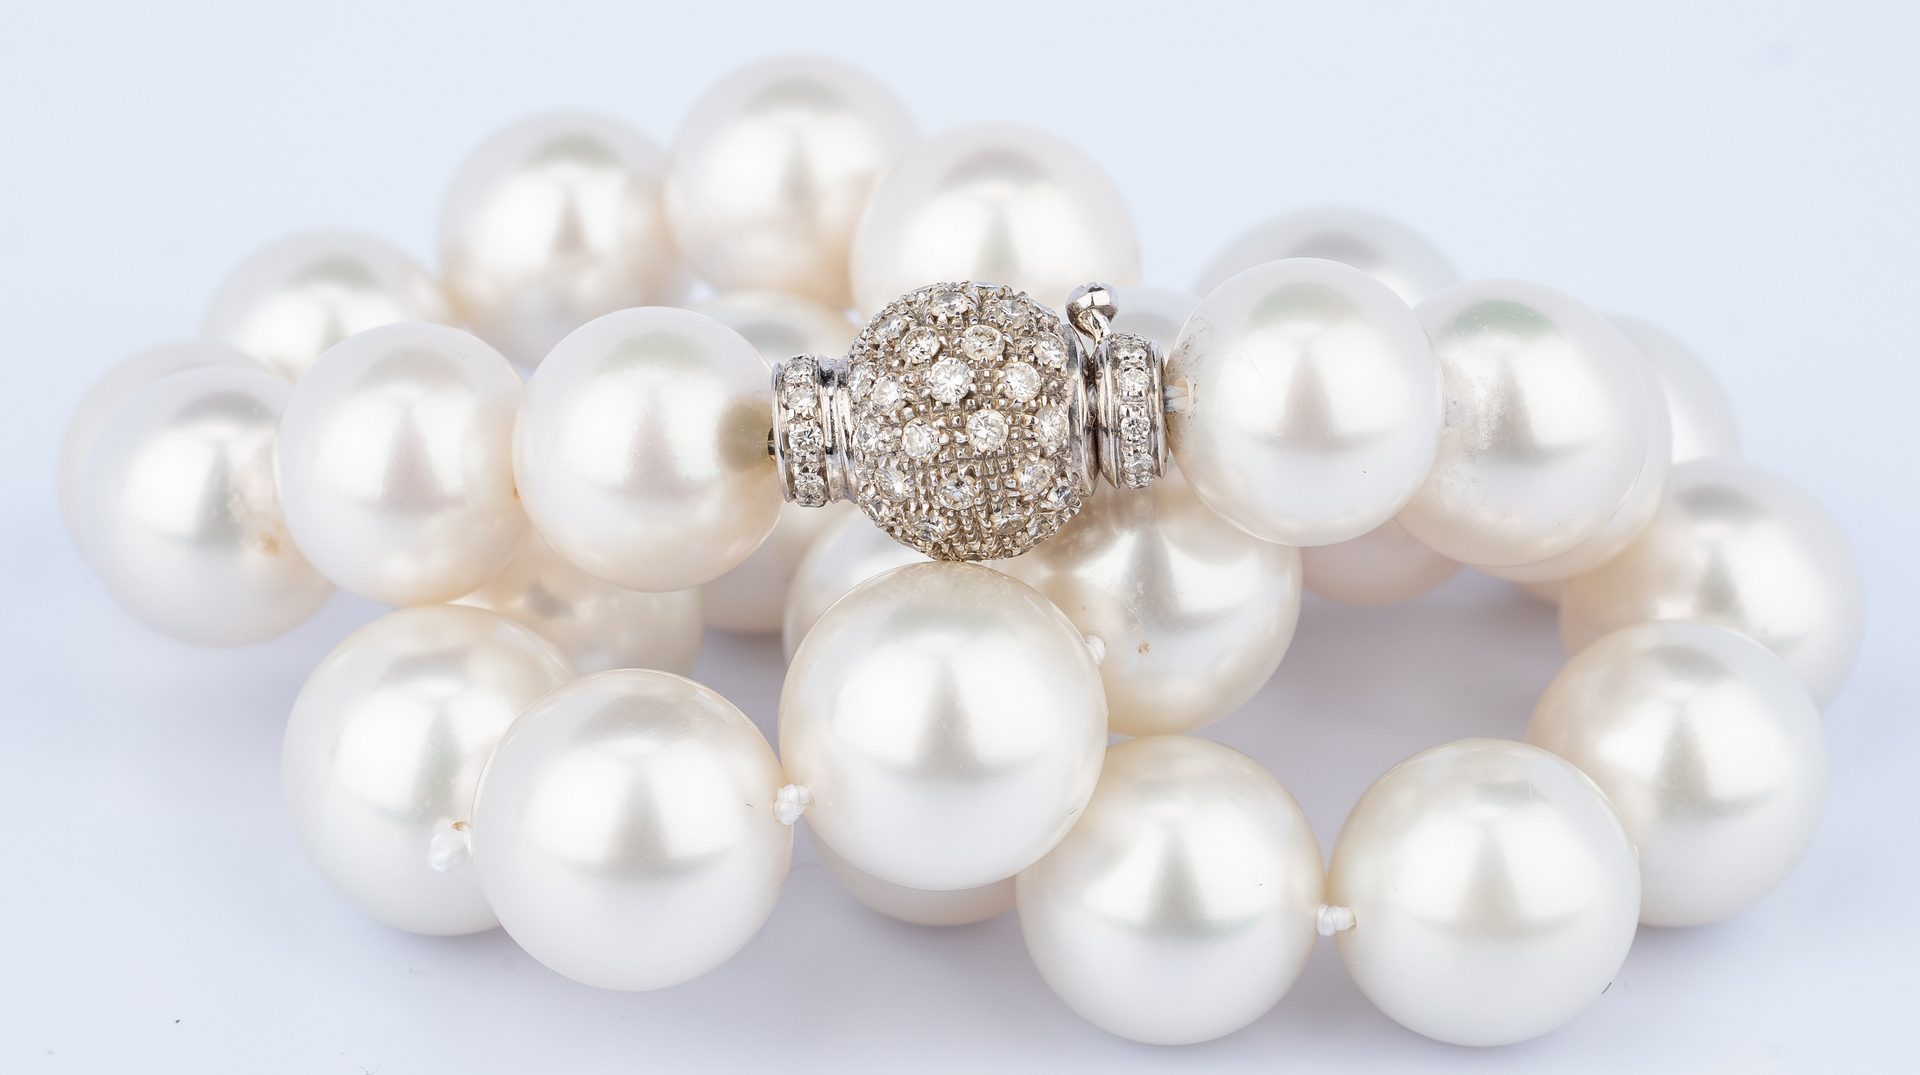 Lot 47: South Sea Pearl Necklace, 13.1-16.6mm